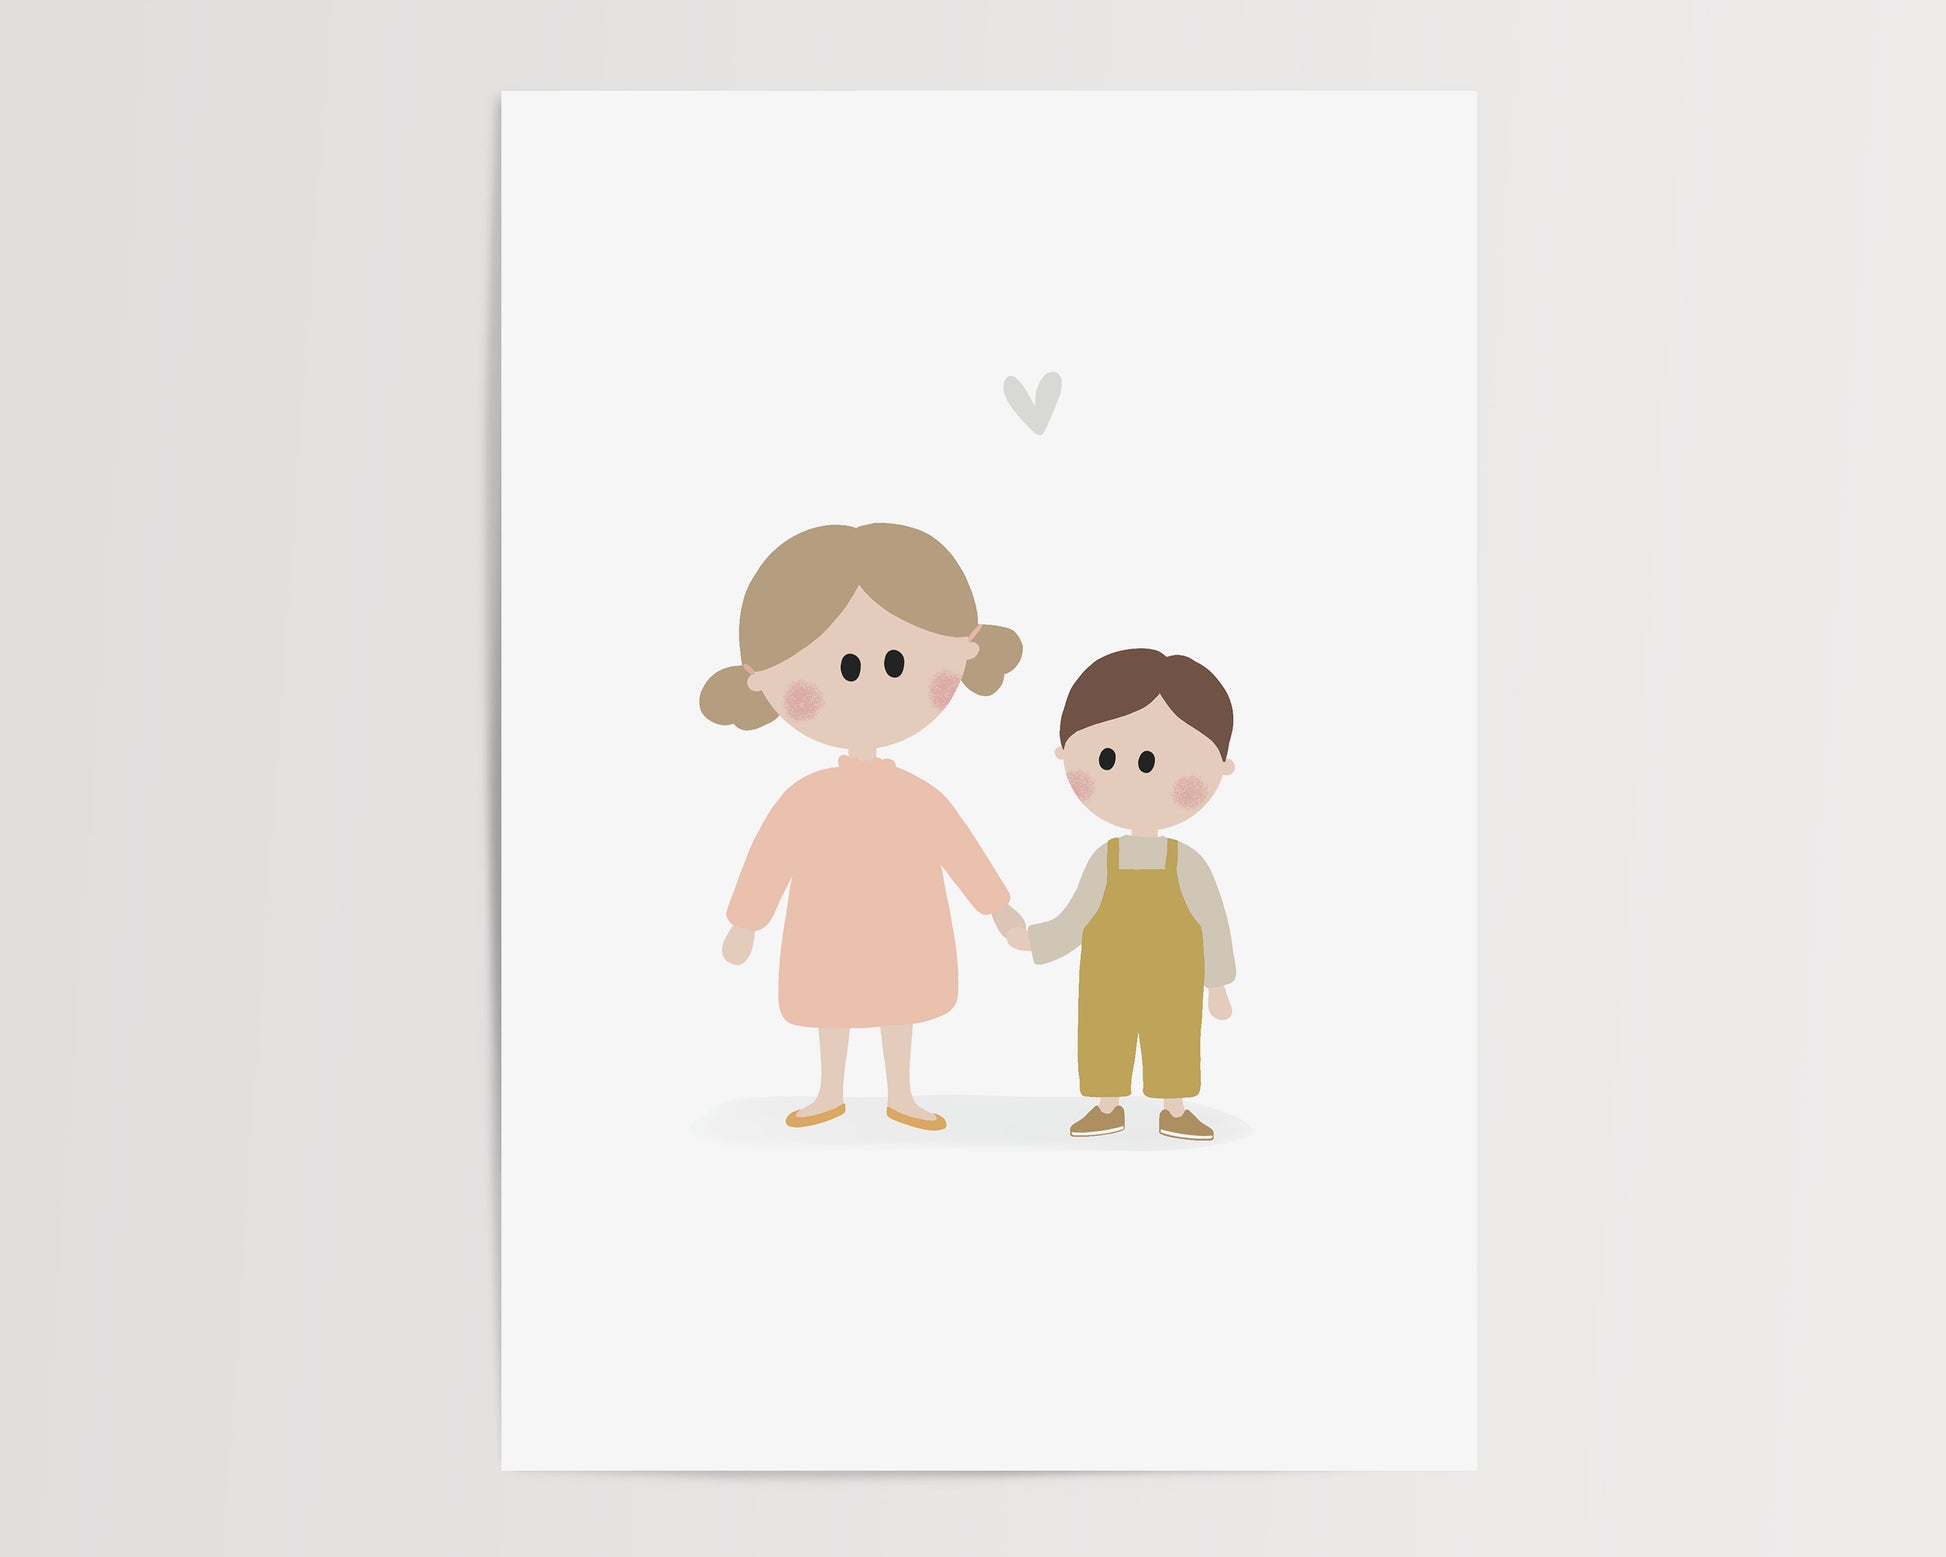 A beautifully illustrated art print featuring a little sister and her younger brother. This poster certainly brings joy and tenderness to your walls with soft pastel colors.